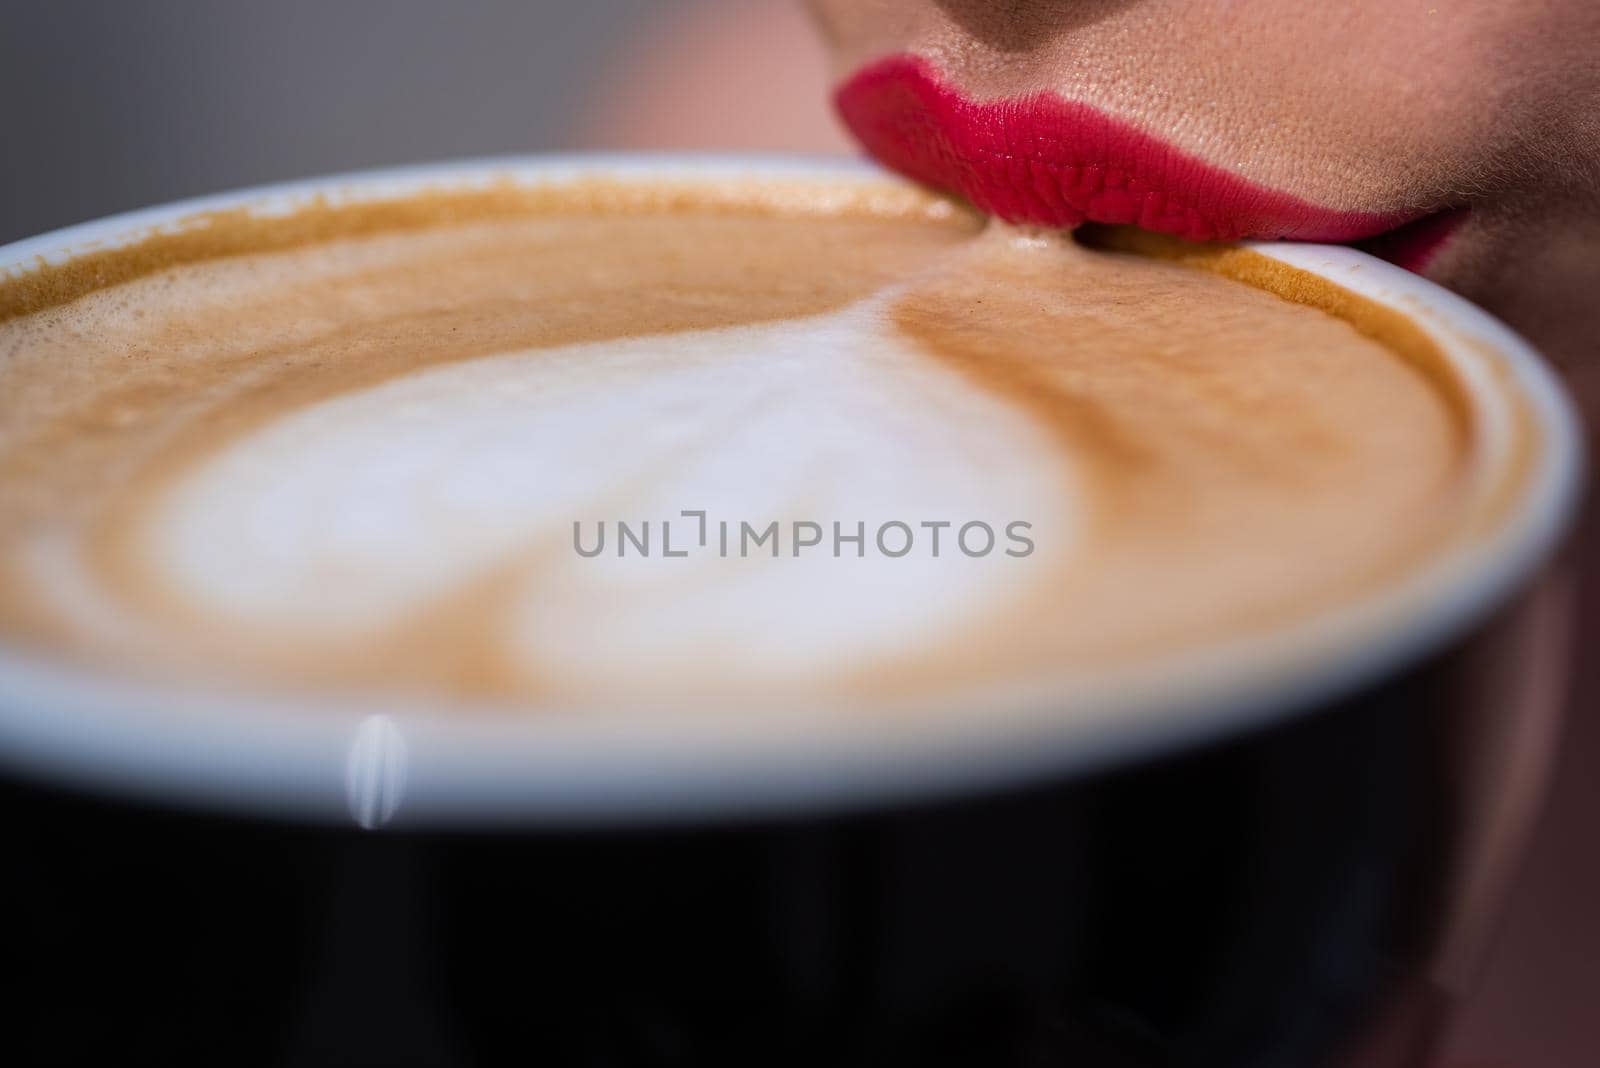 Lips girl touch the cup with coffee. Coffee mug with heart shape on the froth. Closeup of cappuccino surface with heart shape and bright red female lips. Drinking